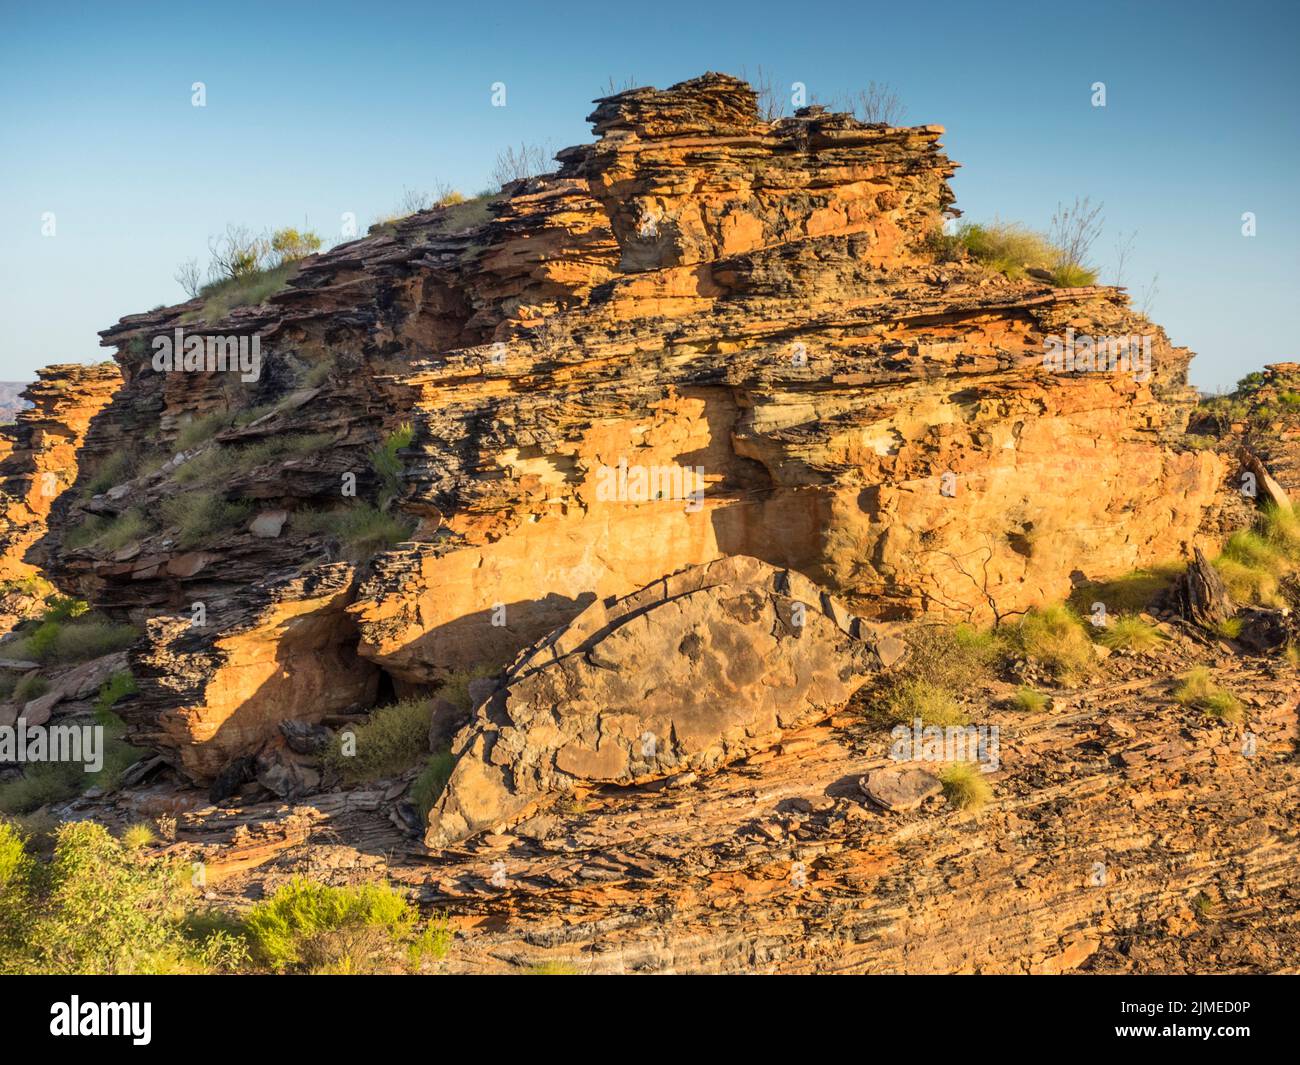 Quartz sandstone and congolmerate sedimentary karst rock formations above spinifex, Mirima National Park, East Kimberley Stock Photo